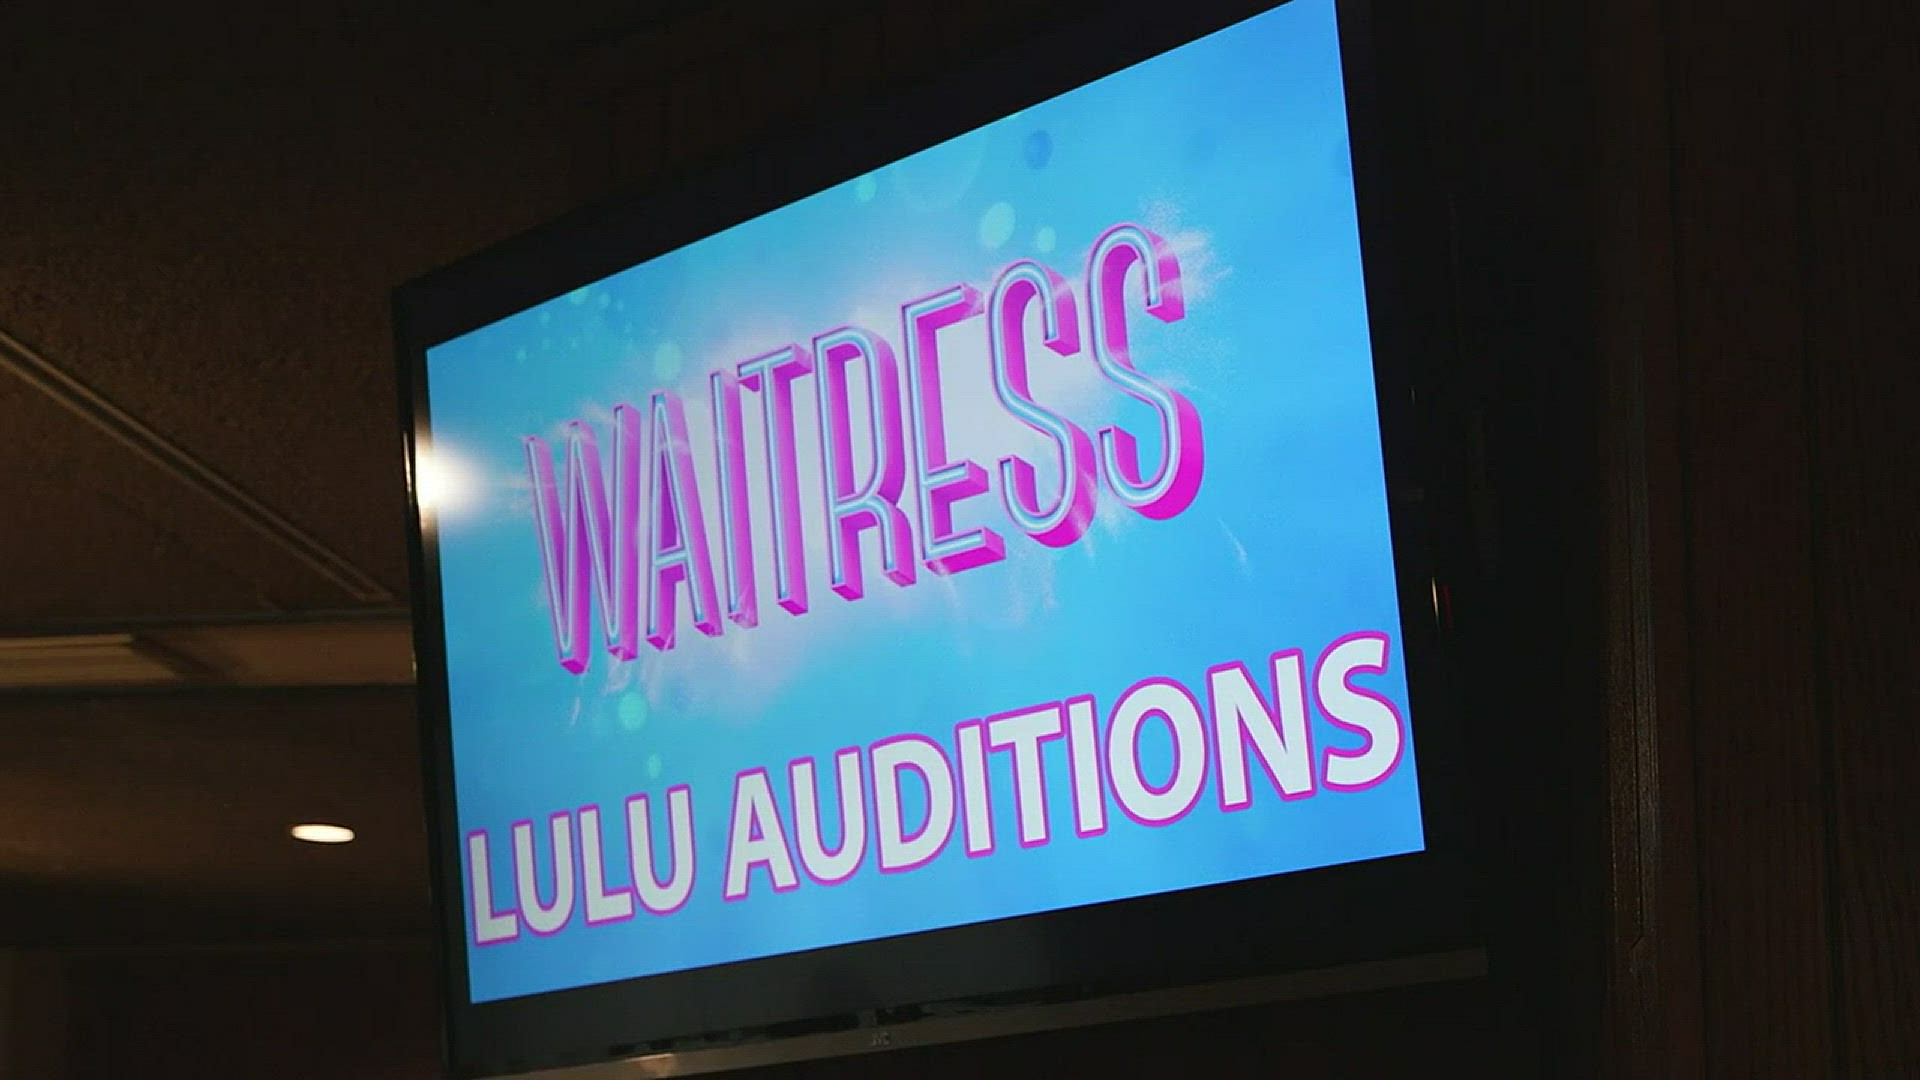 Adorbs! The award-winning musical "Waitress" auditioned North Texas kids to perform the role of "Lulu." The show starts March 28 at Fair Park Music Hall in Dallas. INFO: dallassummermusicals.org